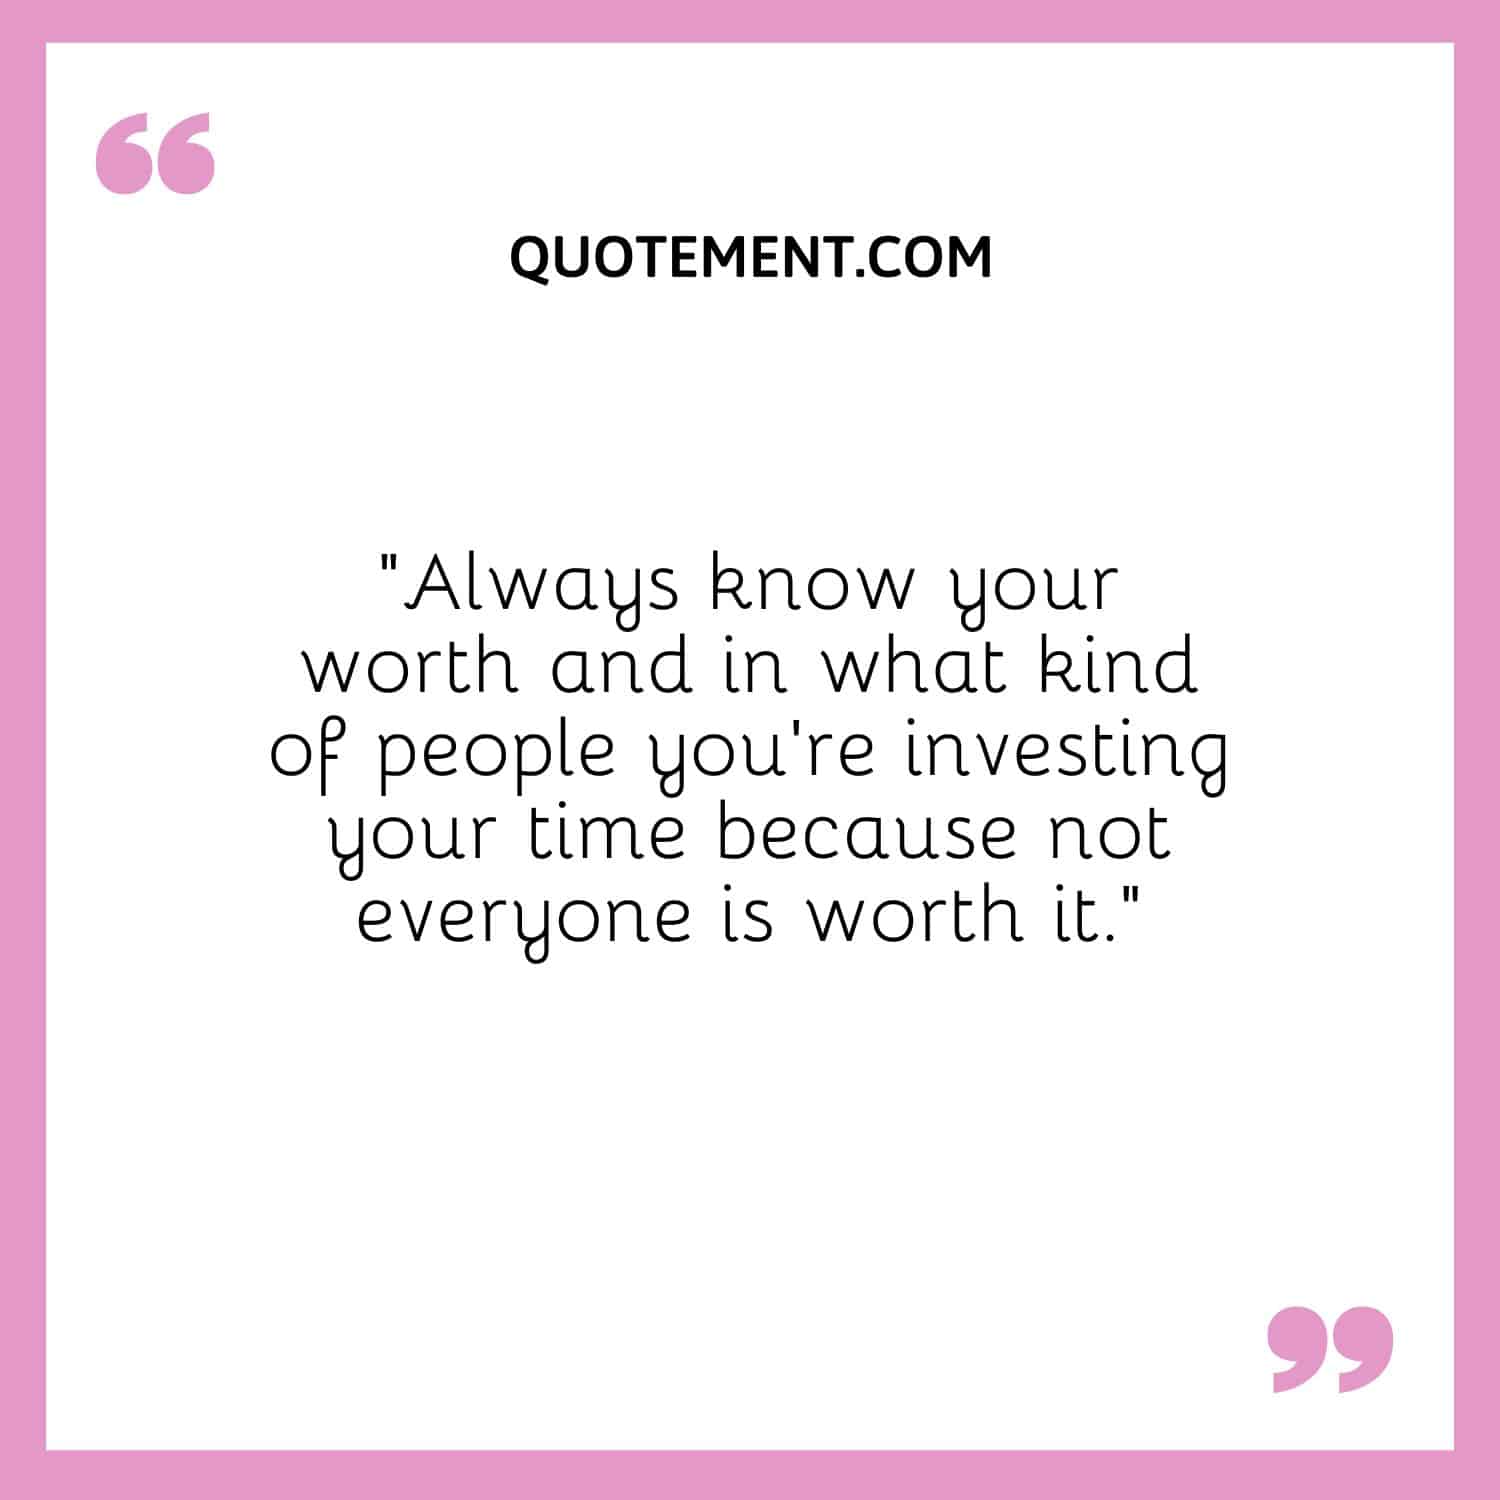 “Always know your worth and in what kind of people you’re investing your time because not everyone is worth it.”